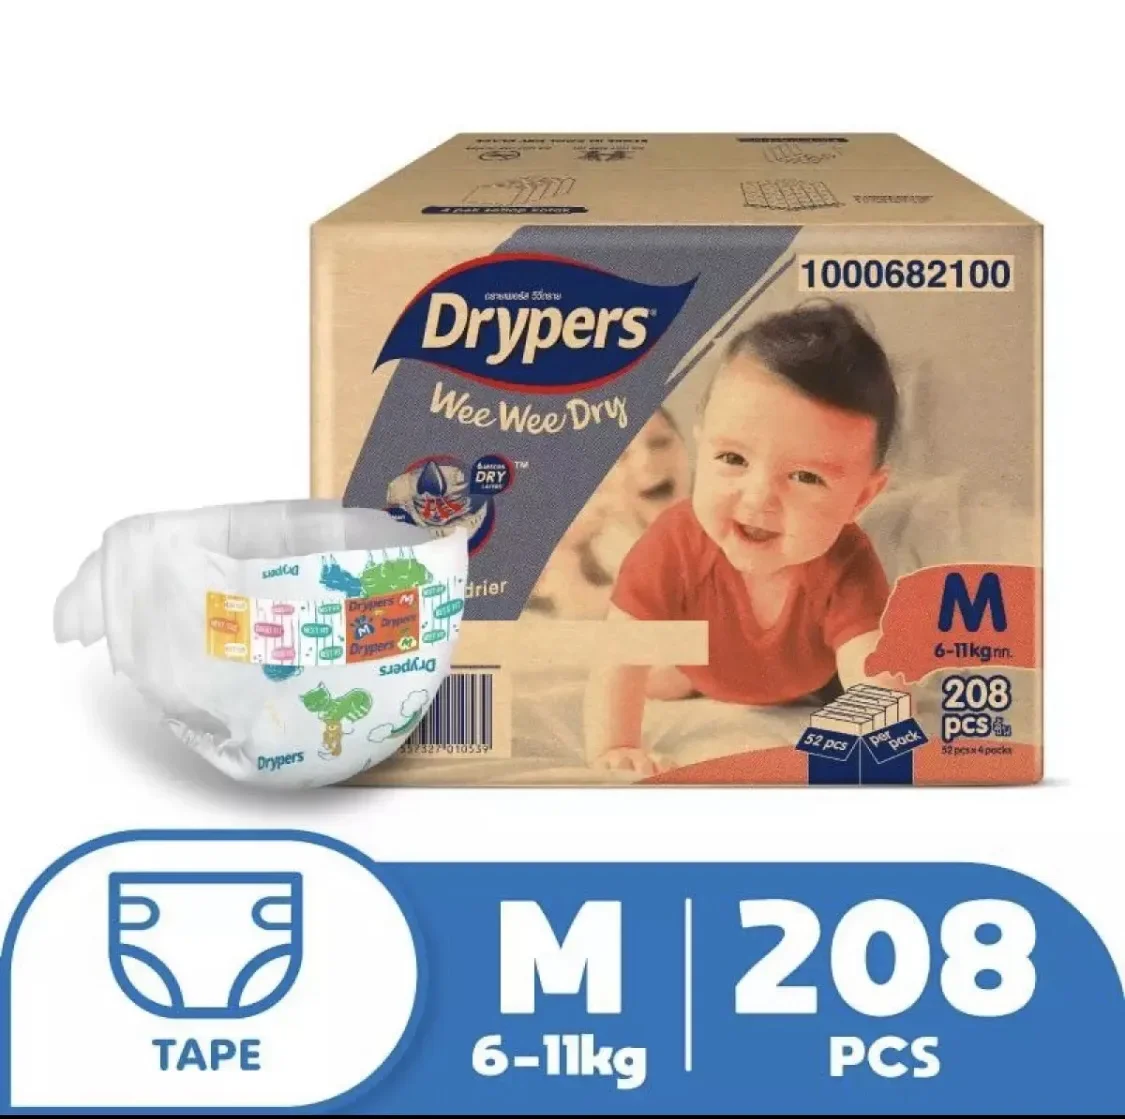 DRYPERS Wee Wee Dry / Diapers / Pampers / Lampin Bayi Pakai Buang, Size M (208 Pcs)